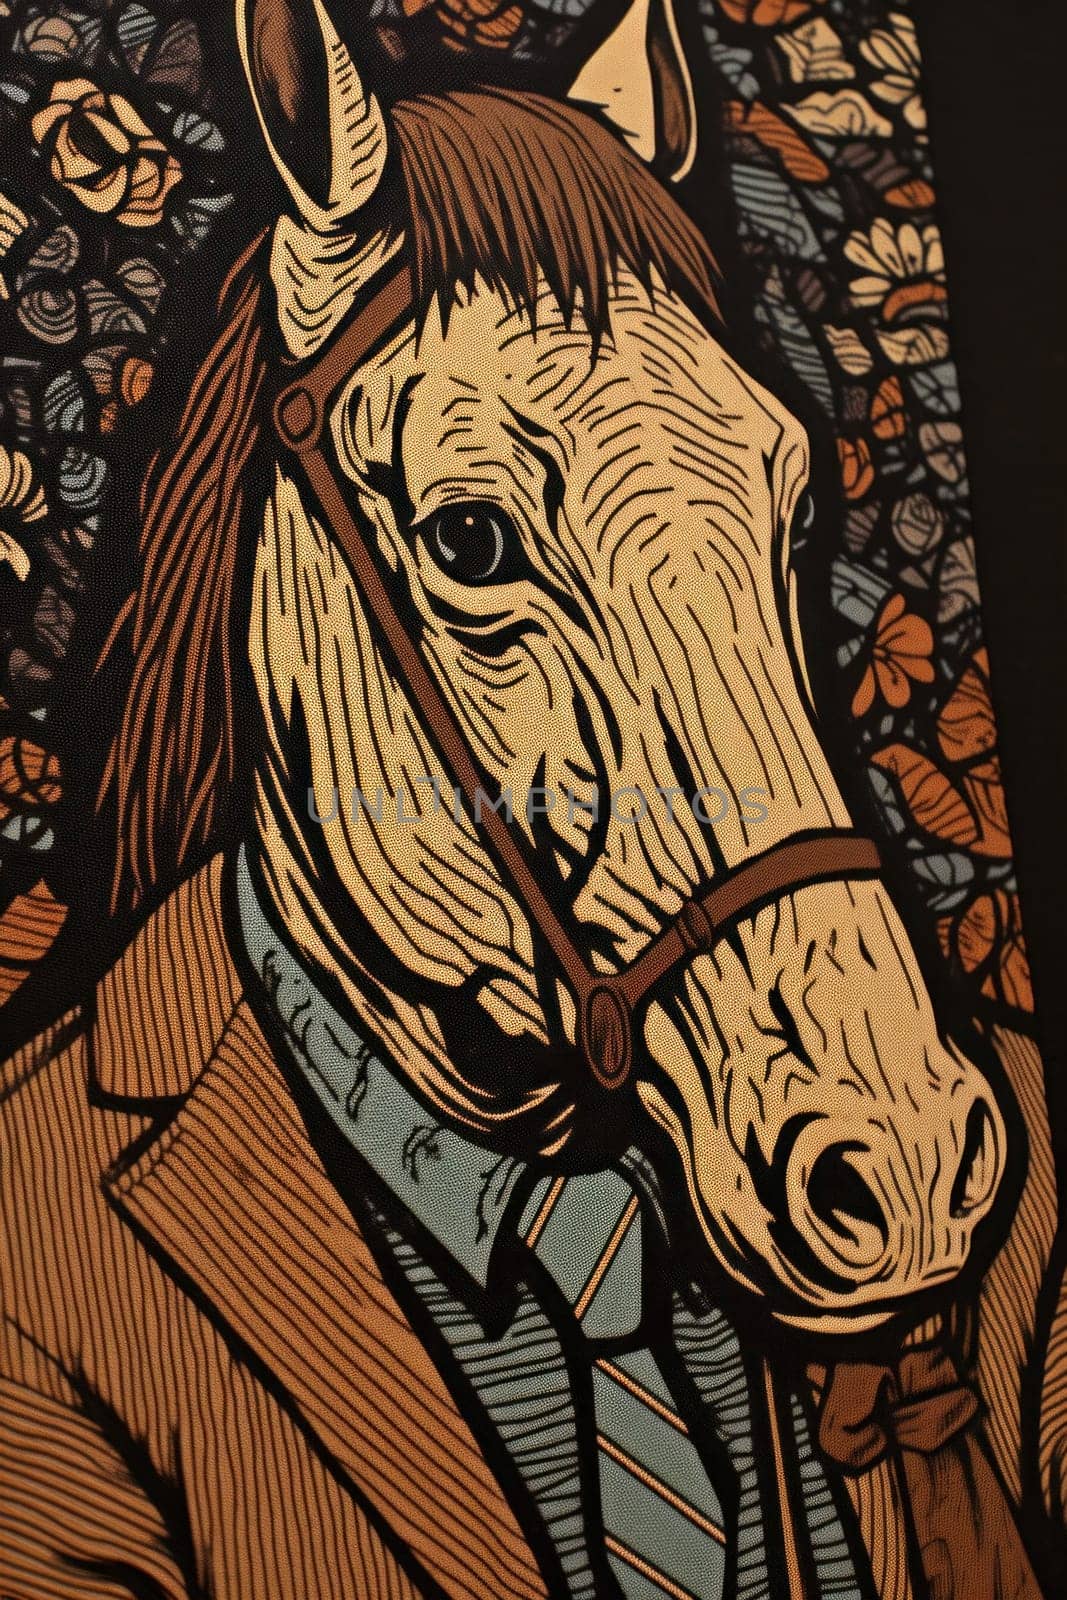 A painting of a horse wearing a suit and tie, AI by starush